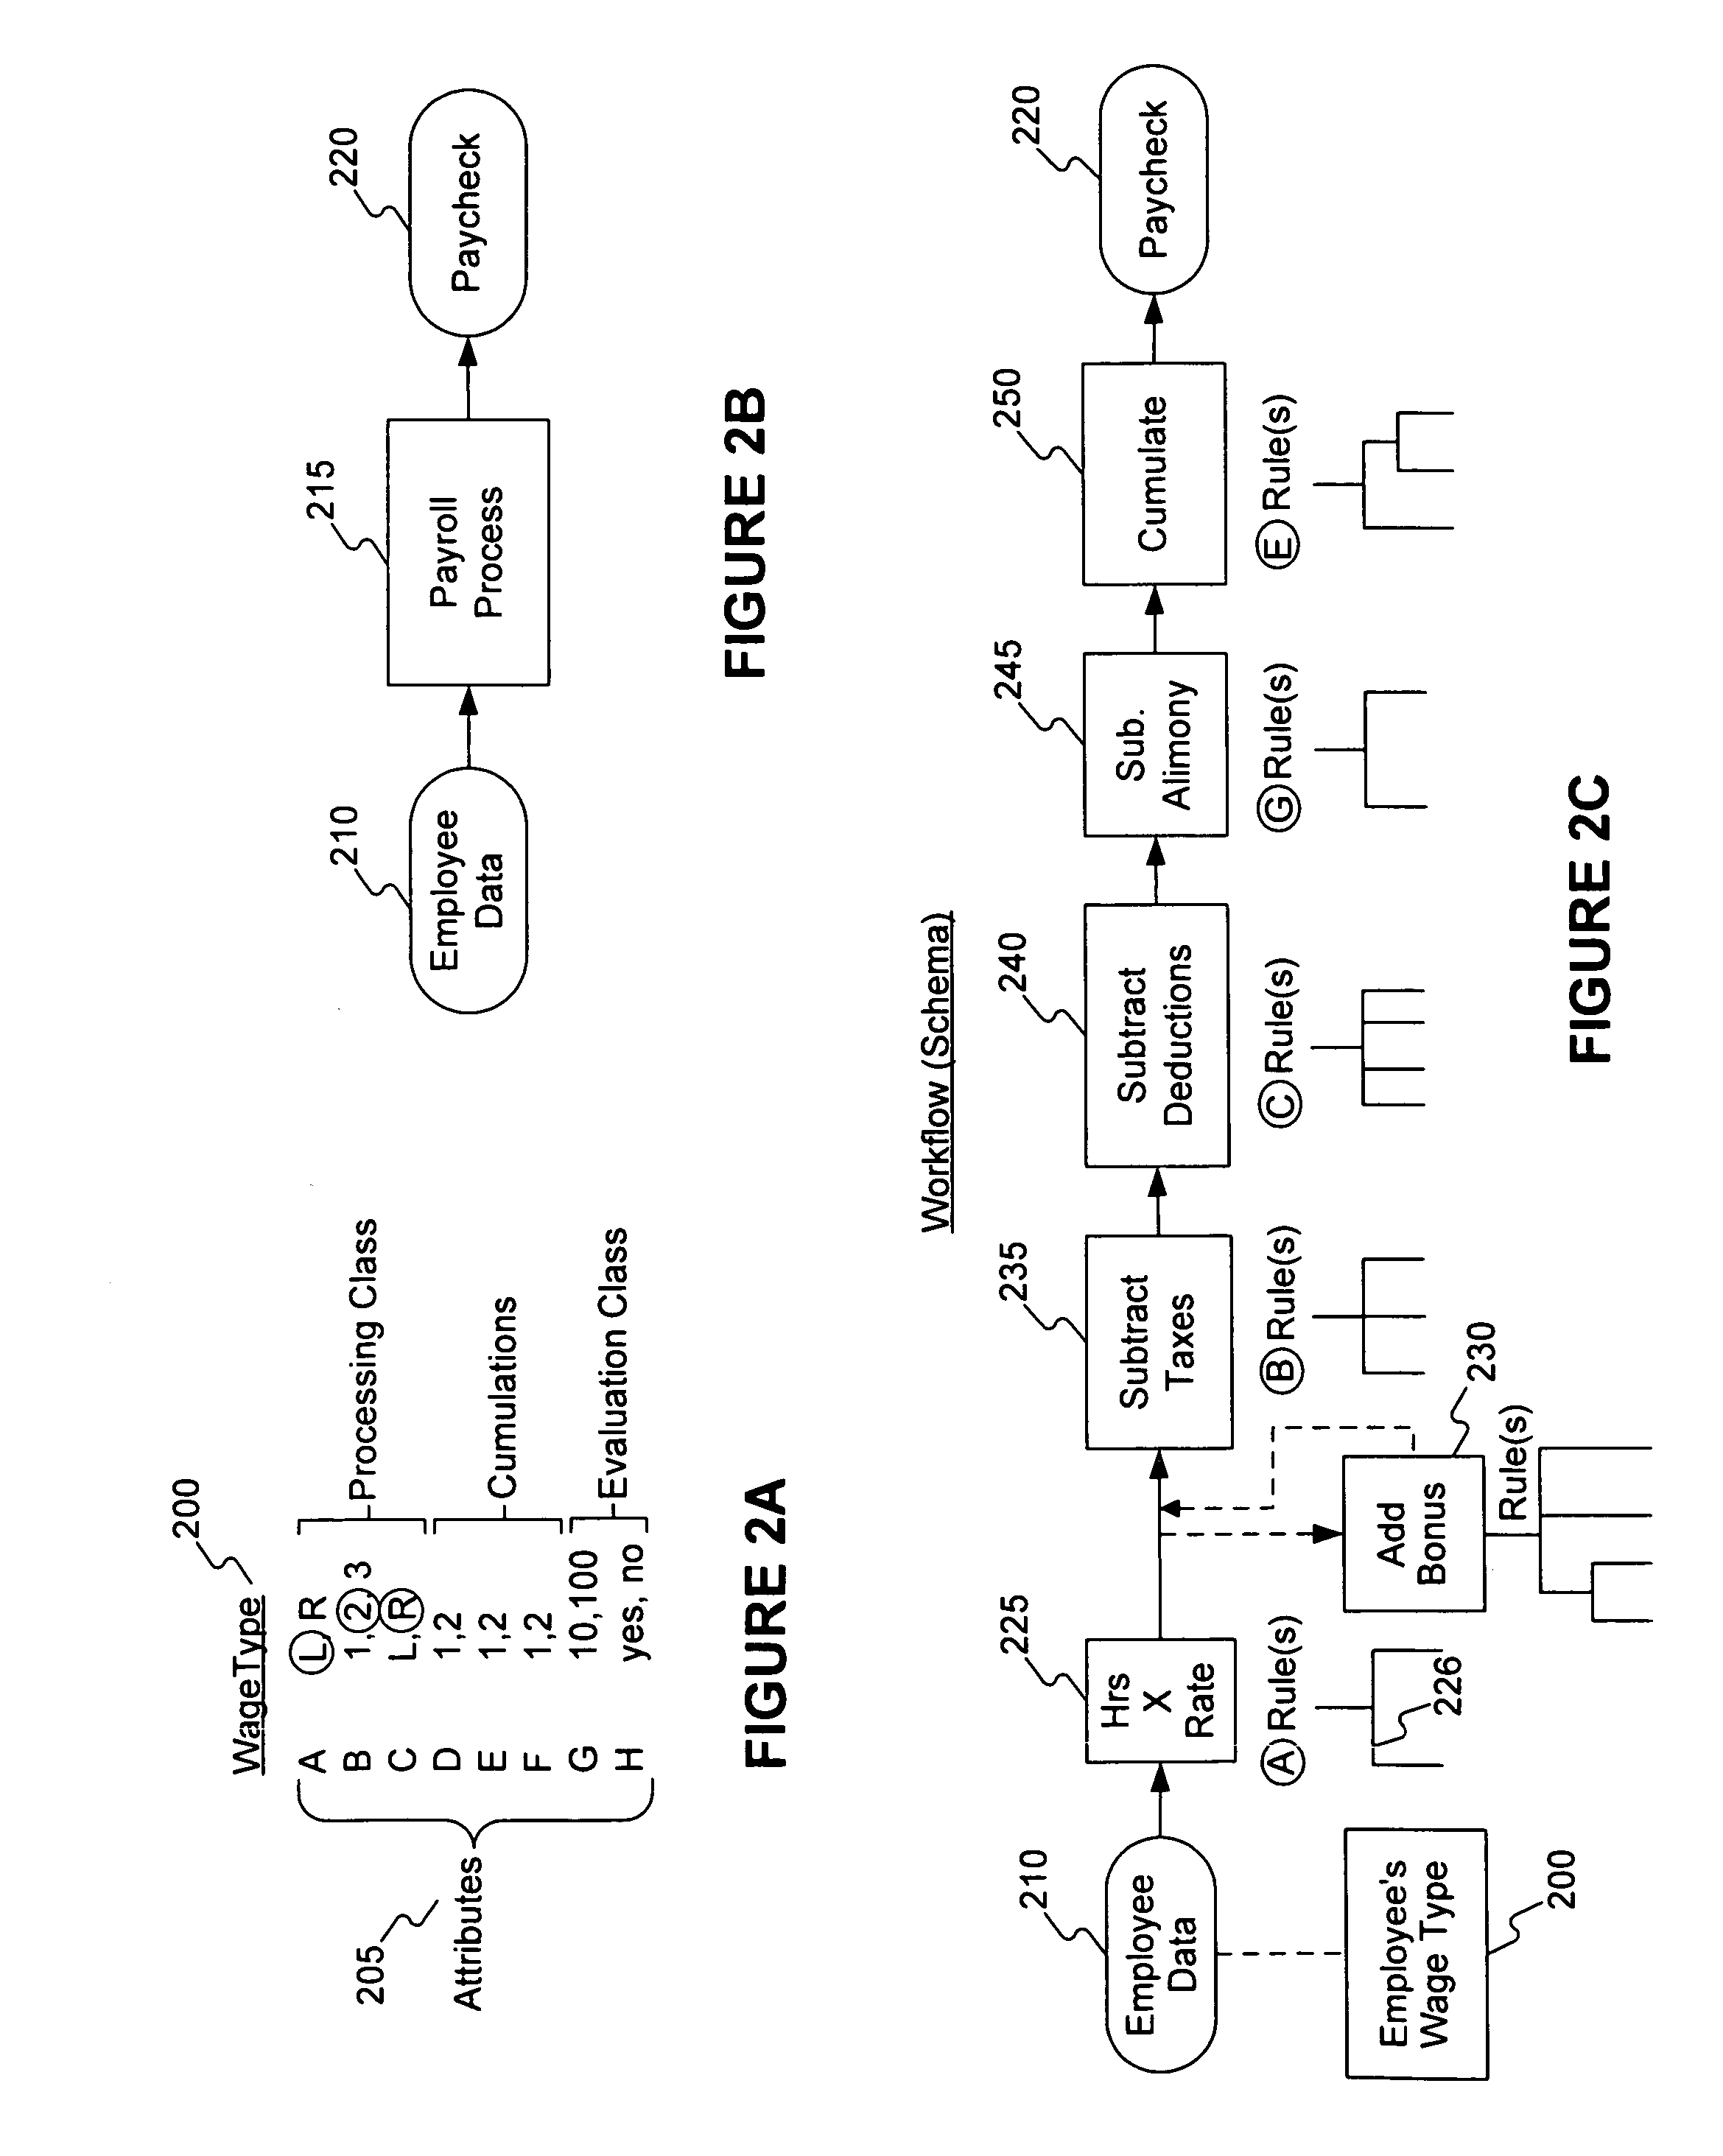 Systems and methods for identifying problems of a business application in a customer support system